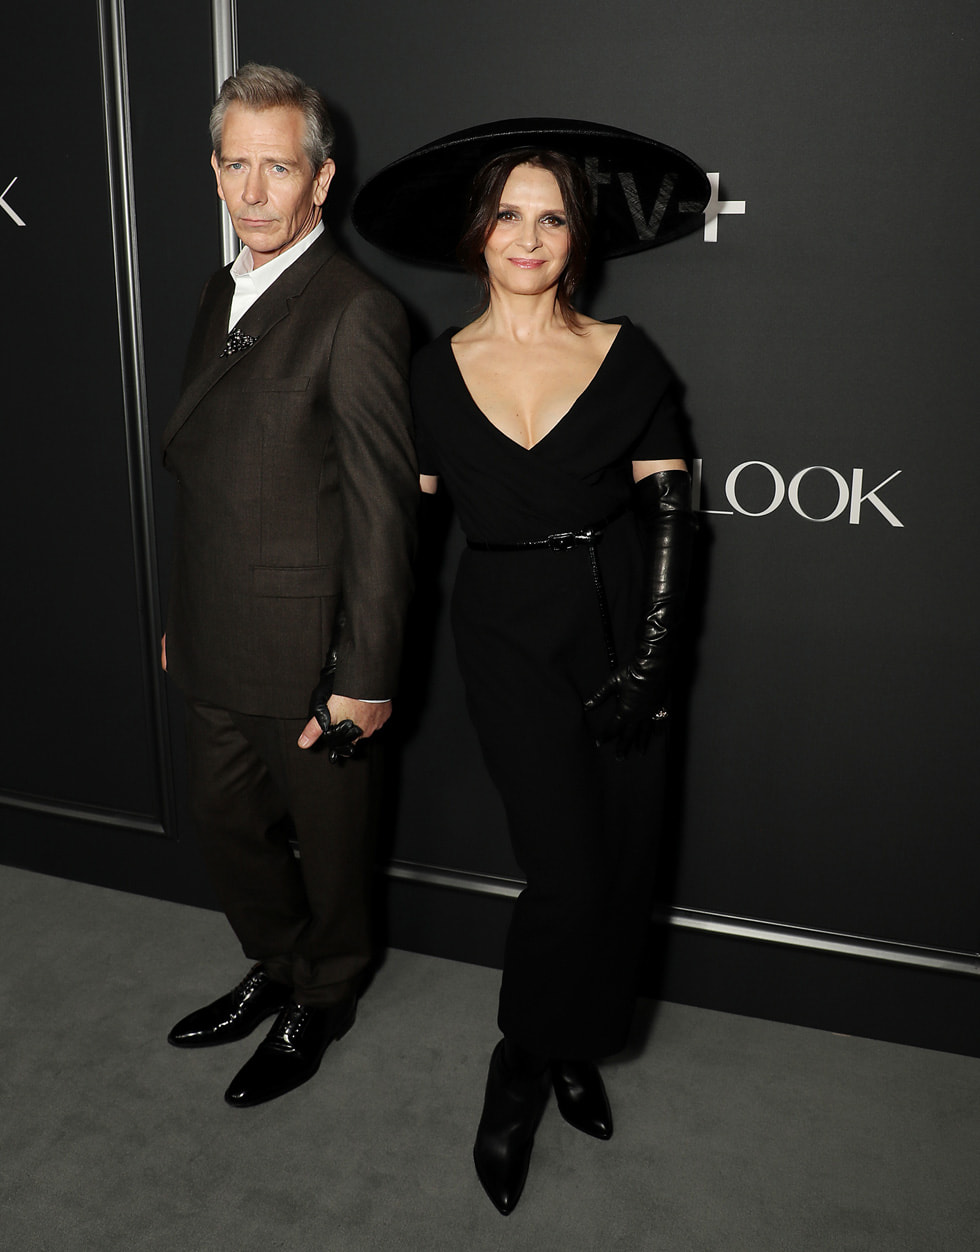 Ben Mendelsohn and Juliette Binoche attend the premiere of the Apple TV+ thrilling series “The New Look” at Florence Gould Hall. “The New Look” will make its global debut on Apple TV+ on Wednesday, 14 February 2024.